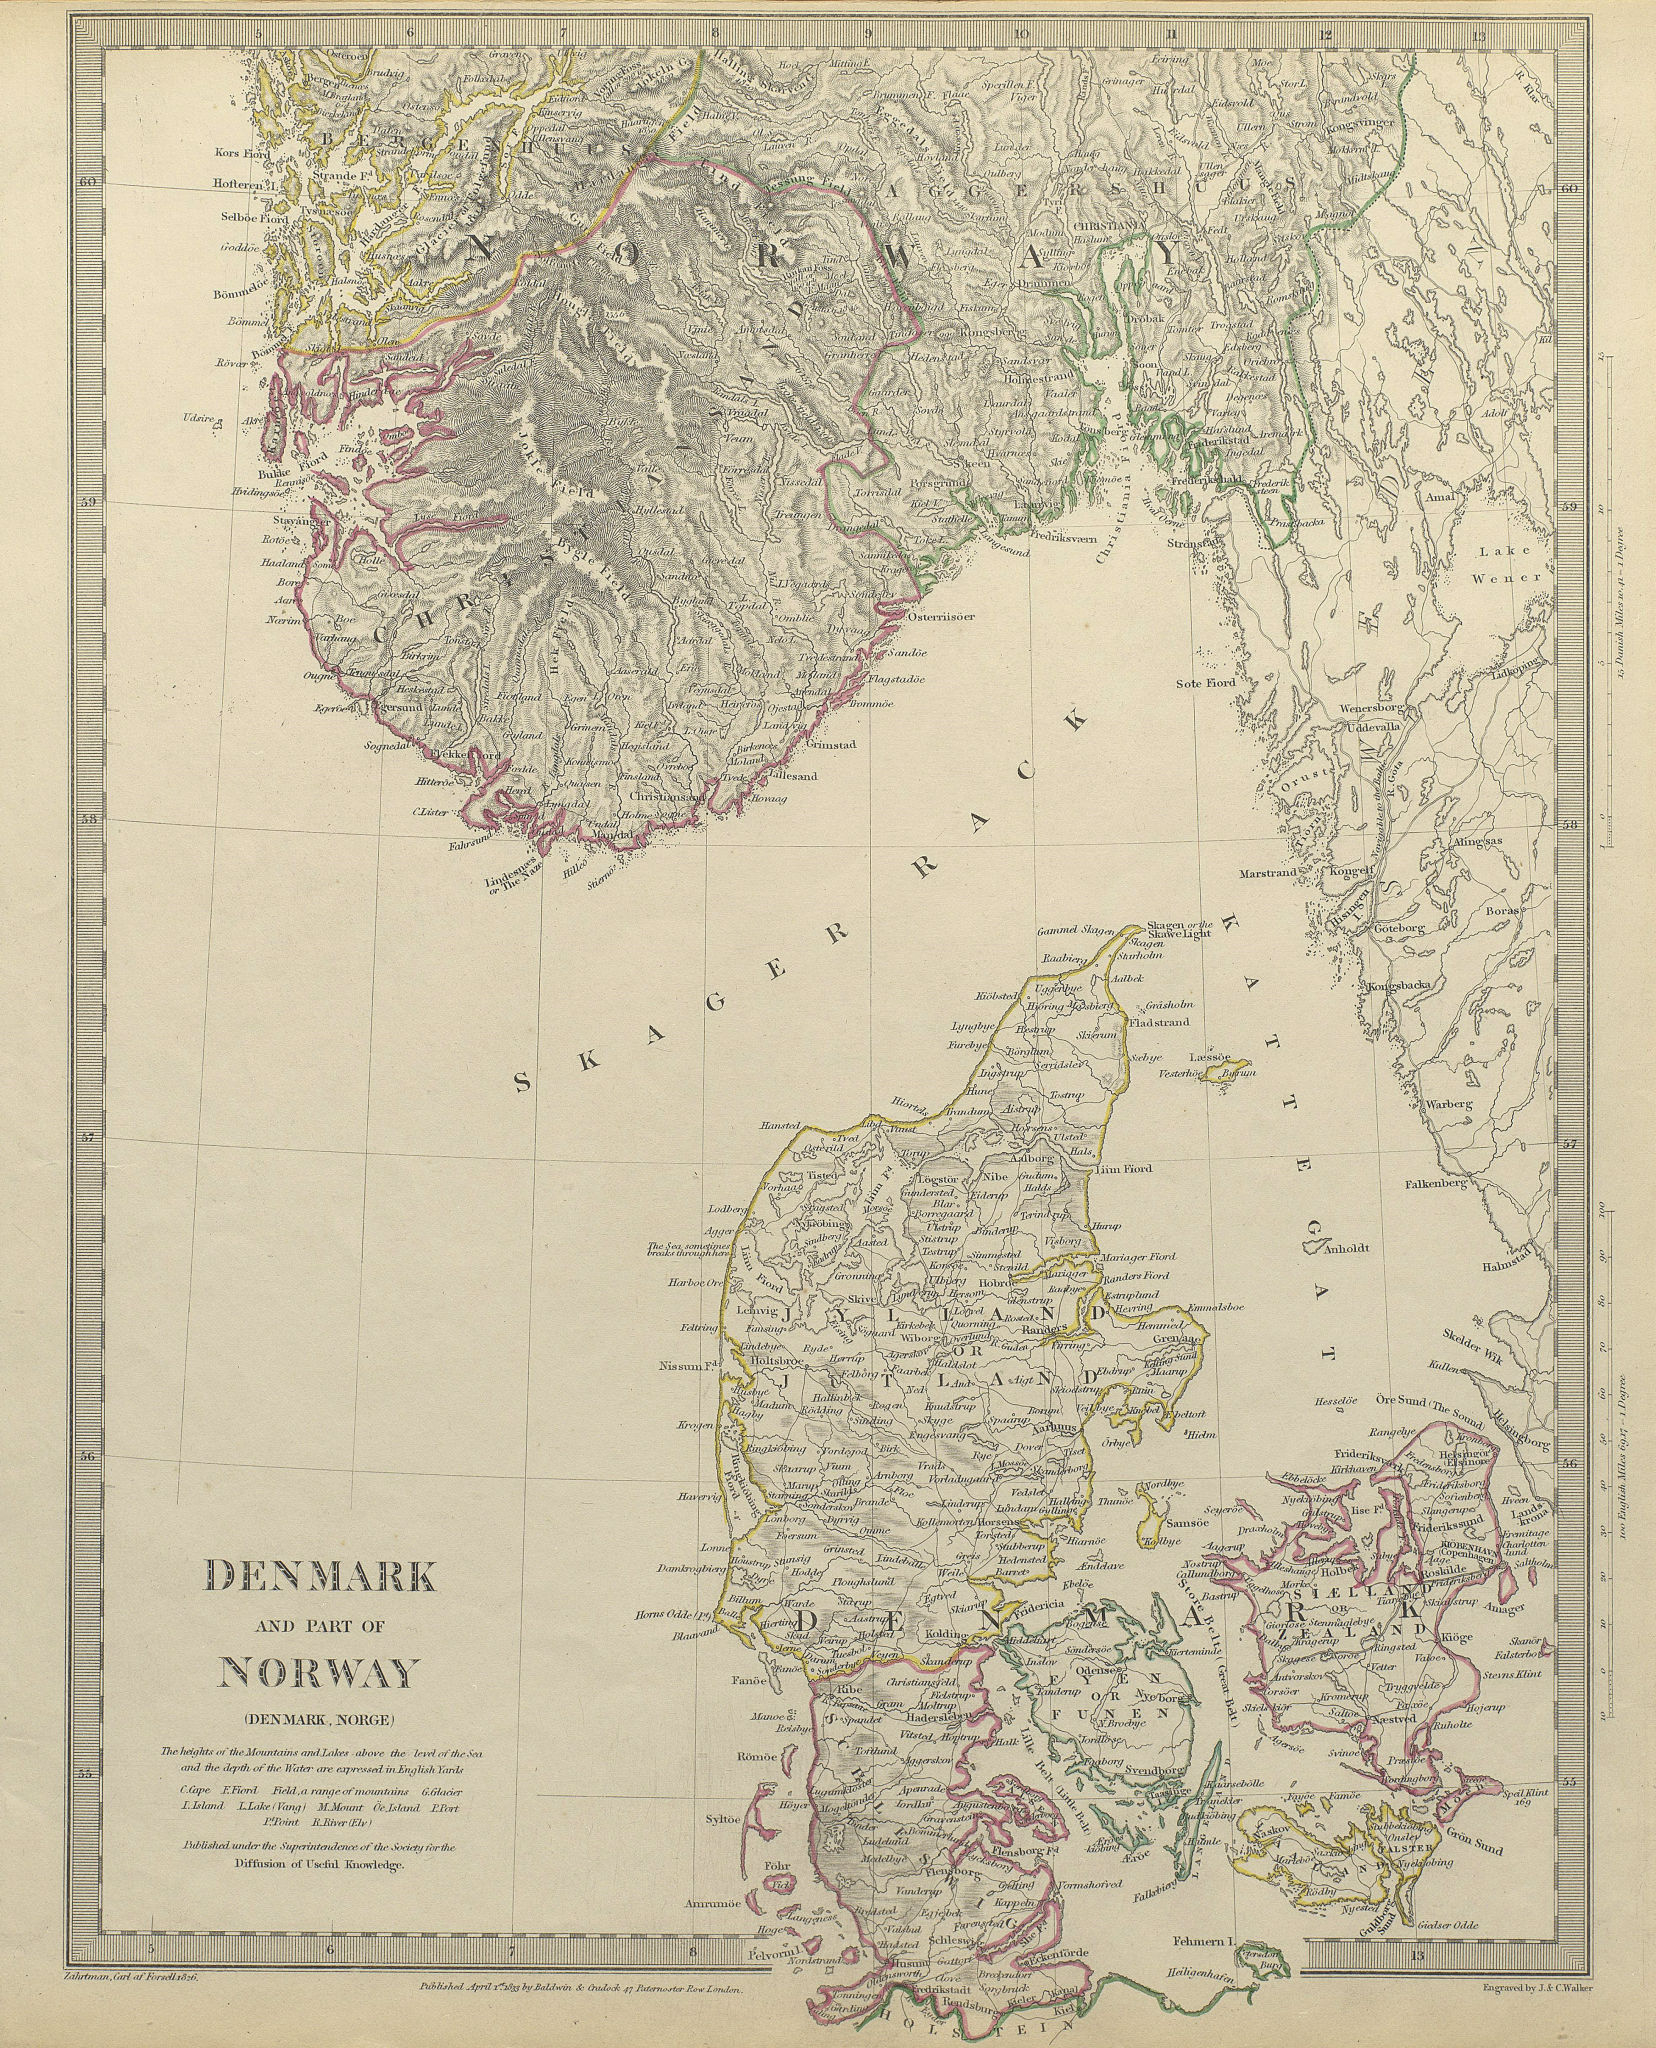 Associate Product SCANDINAVIA. Denmark and Southern Norway (Norge) . SDUK 1844 old antique map